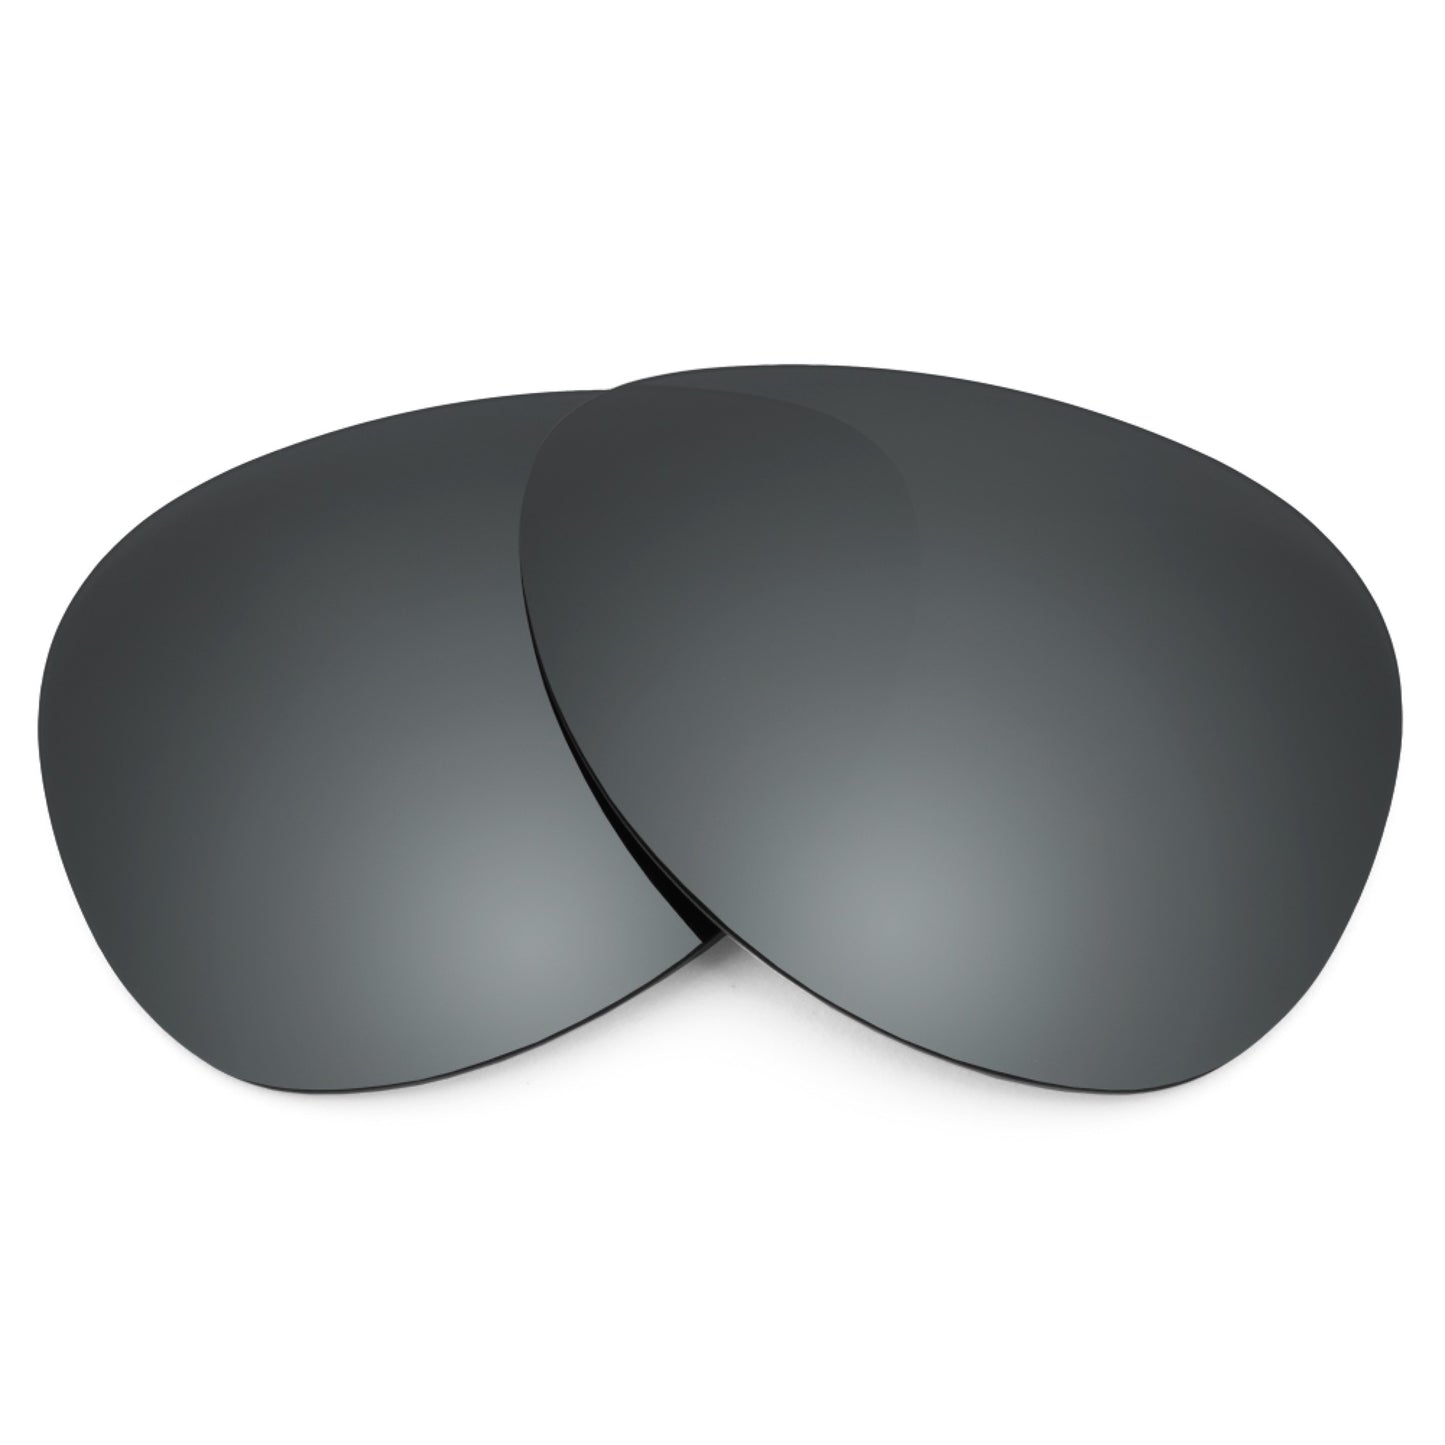 Revant replacement lenses for Ray-Ban Outdoorsman II RB3029 62mm Non-Polarized Black Chrome